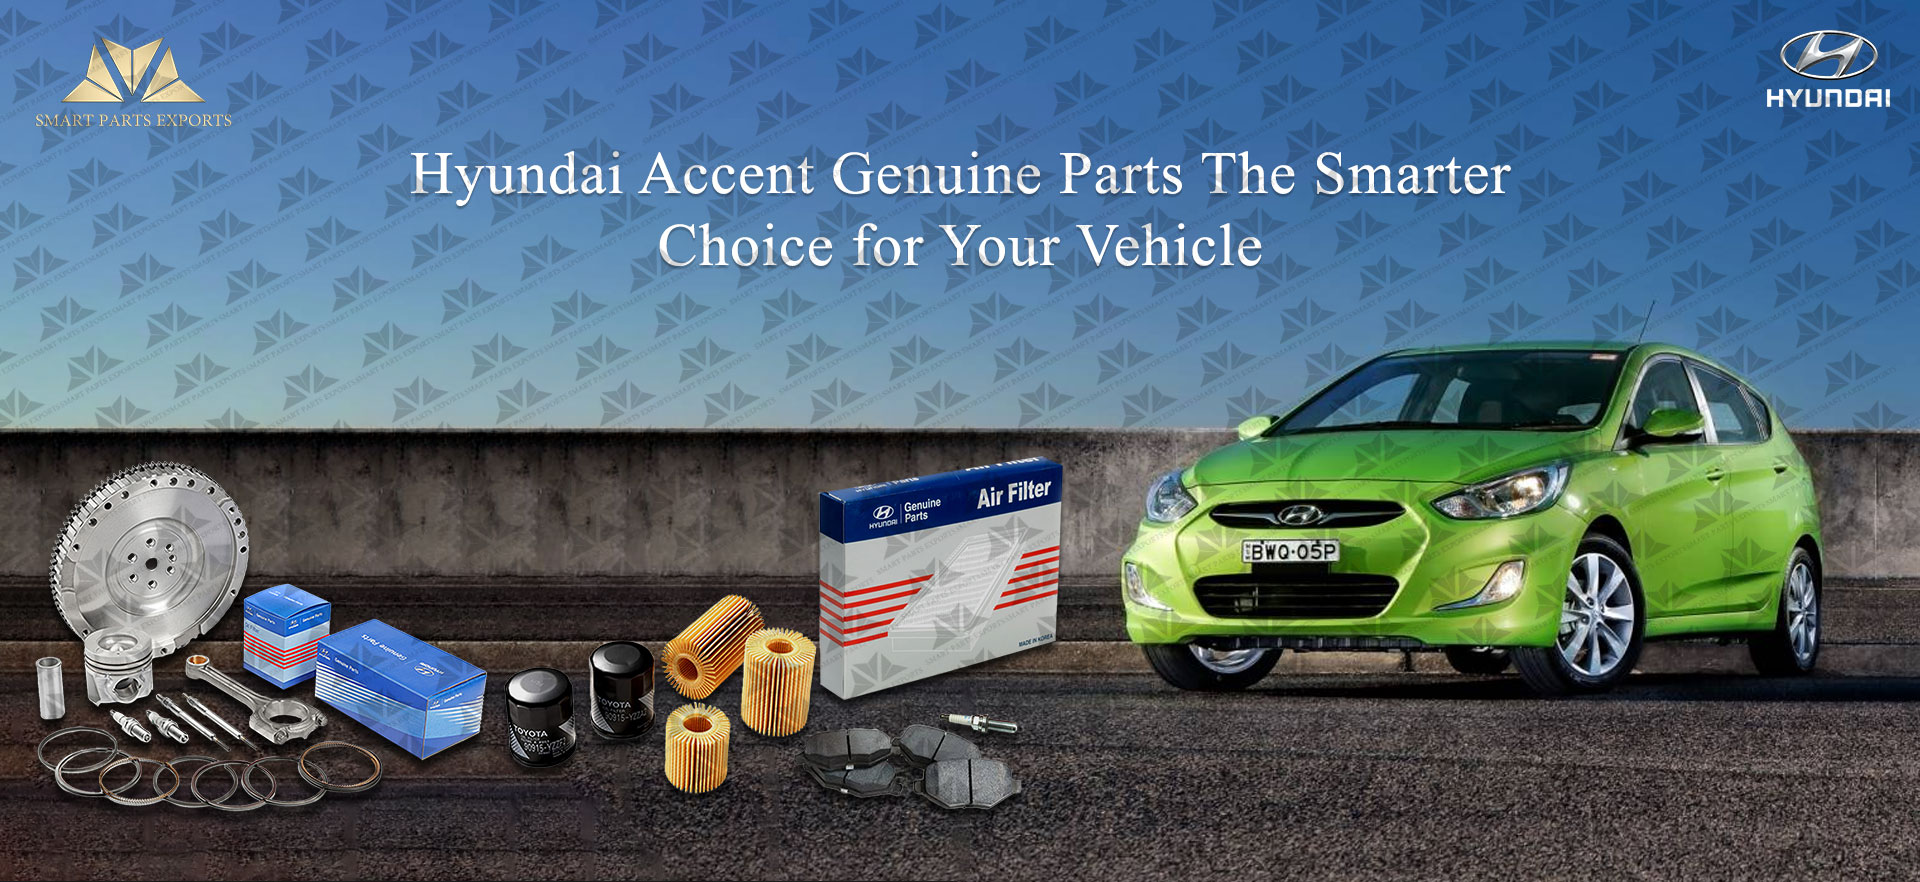 Hyundai Accent Genuine Parts: The Smarter Choice for Your Vehicle